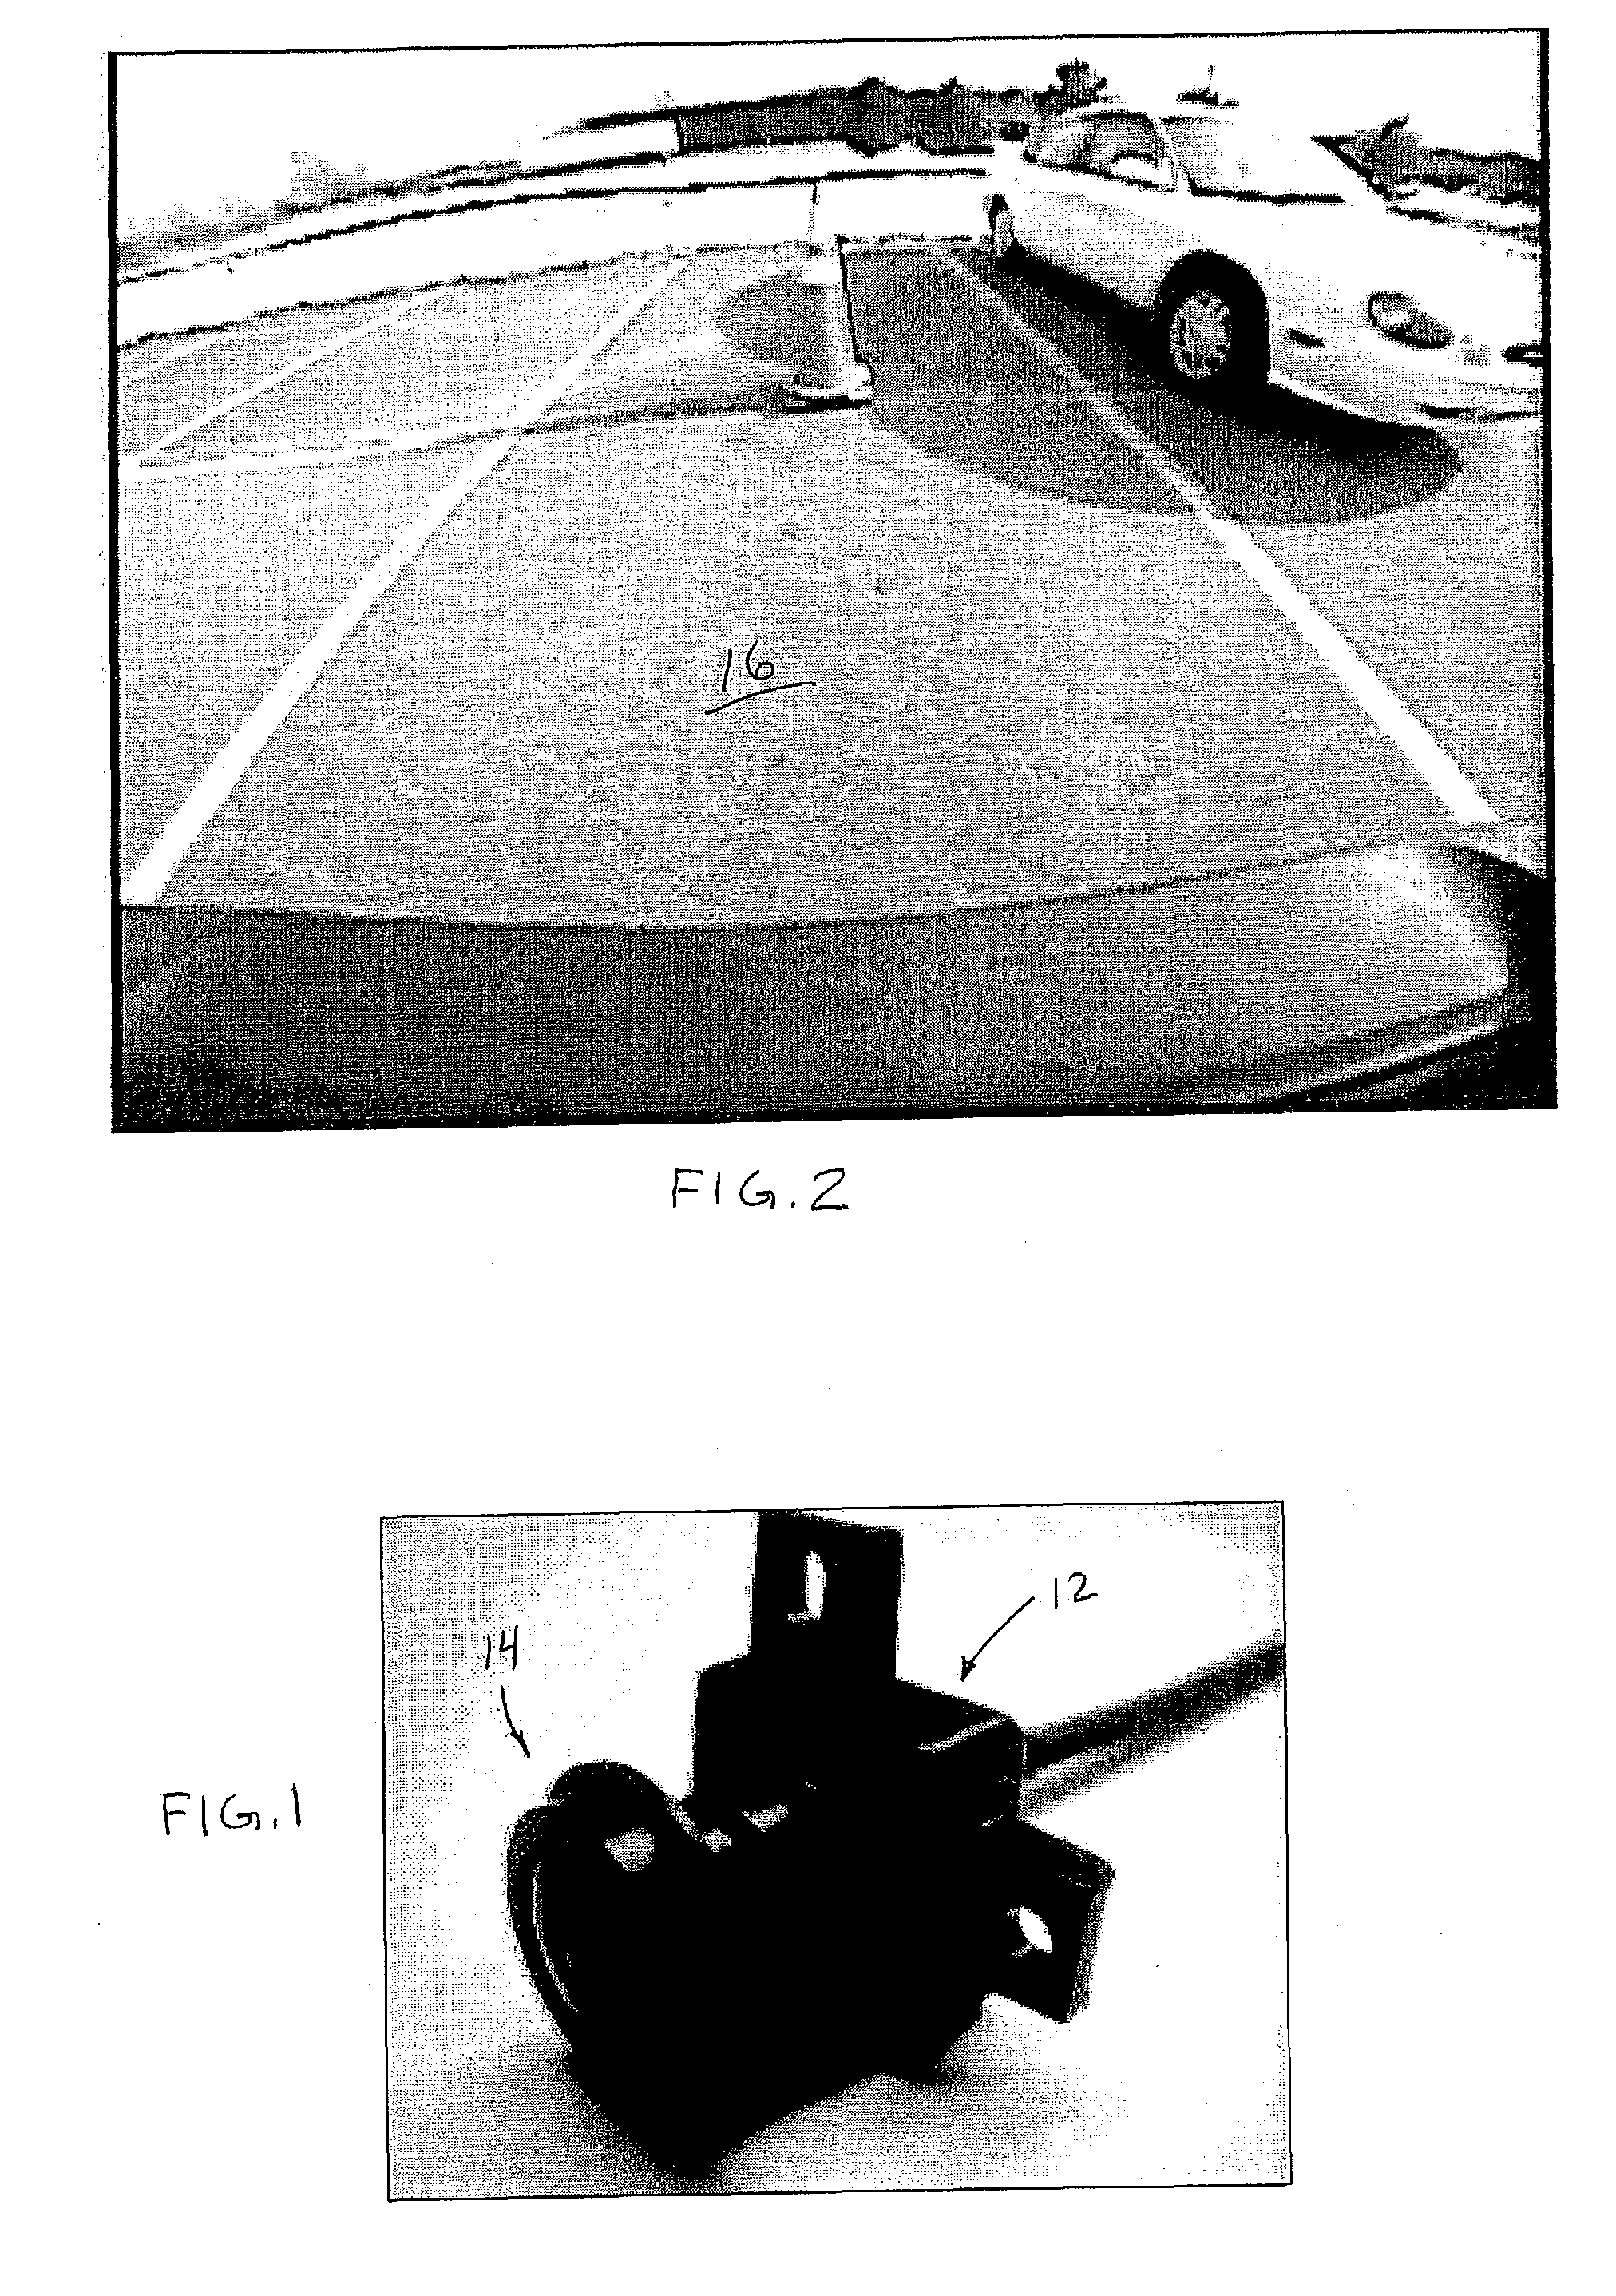 Imaging System for Vehicle